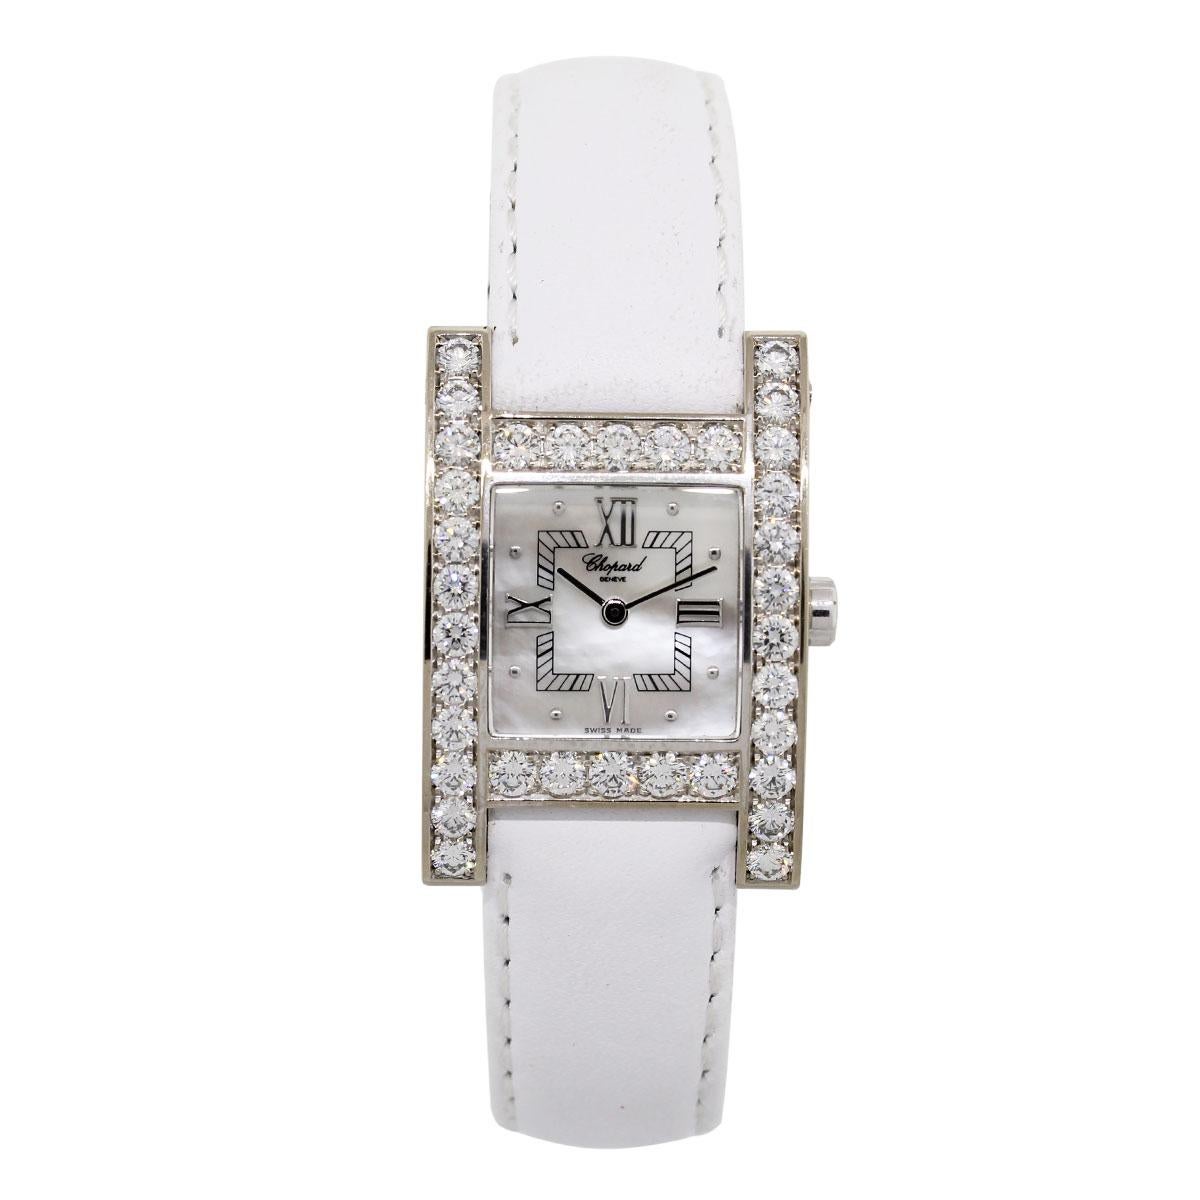 Brand: Chopard
MPN: 445/1
Model: Your Hour
Case Material: 18k white gold
Case Diameter: 24.5mm
Bezel: Diamond bezel
Dial: Mother of pearl roman dial
Bracelet: White leather strap (aftermarket)
Crystal: Sapphire
Size: Will fit up to a 6.75″